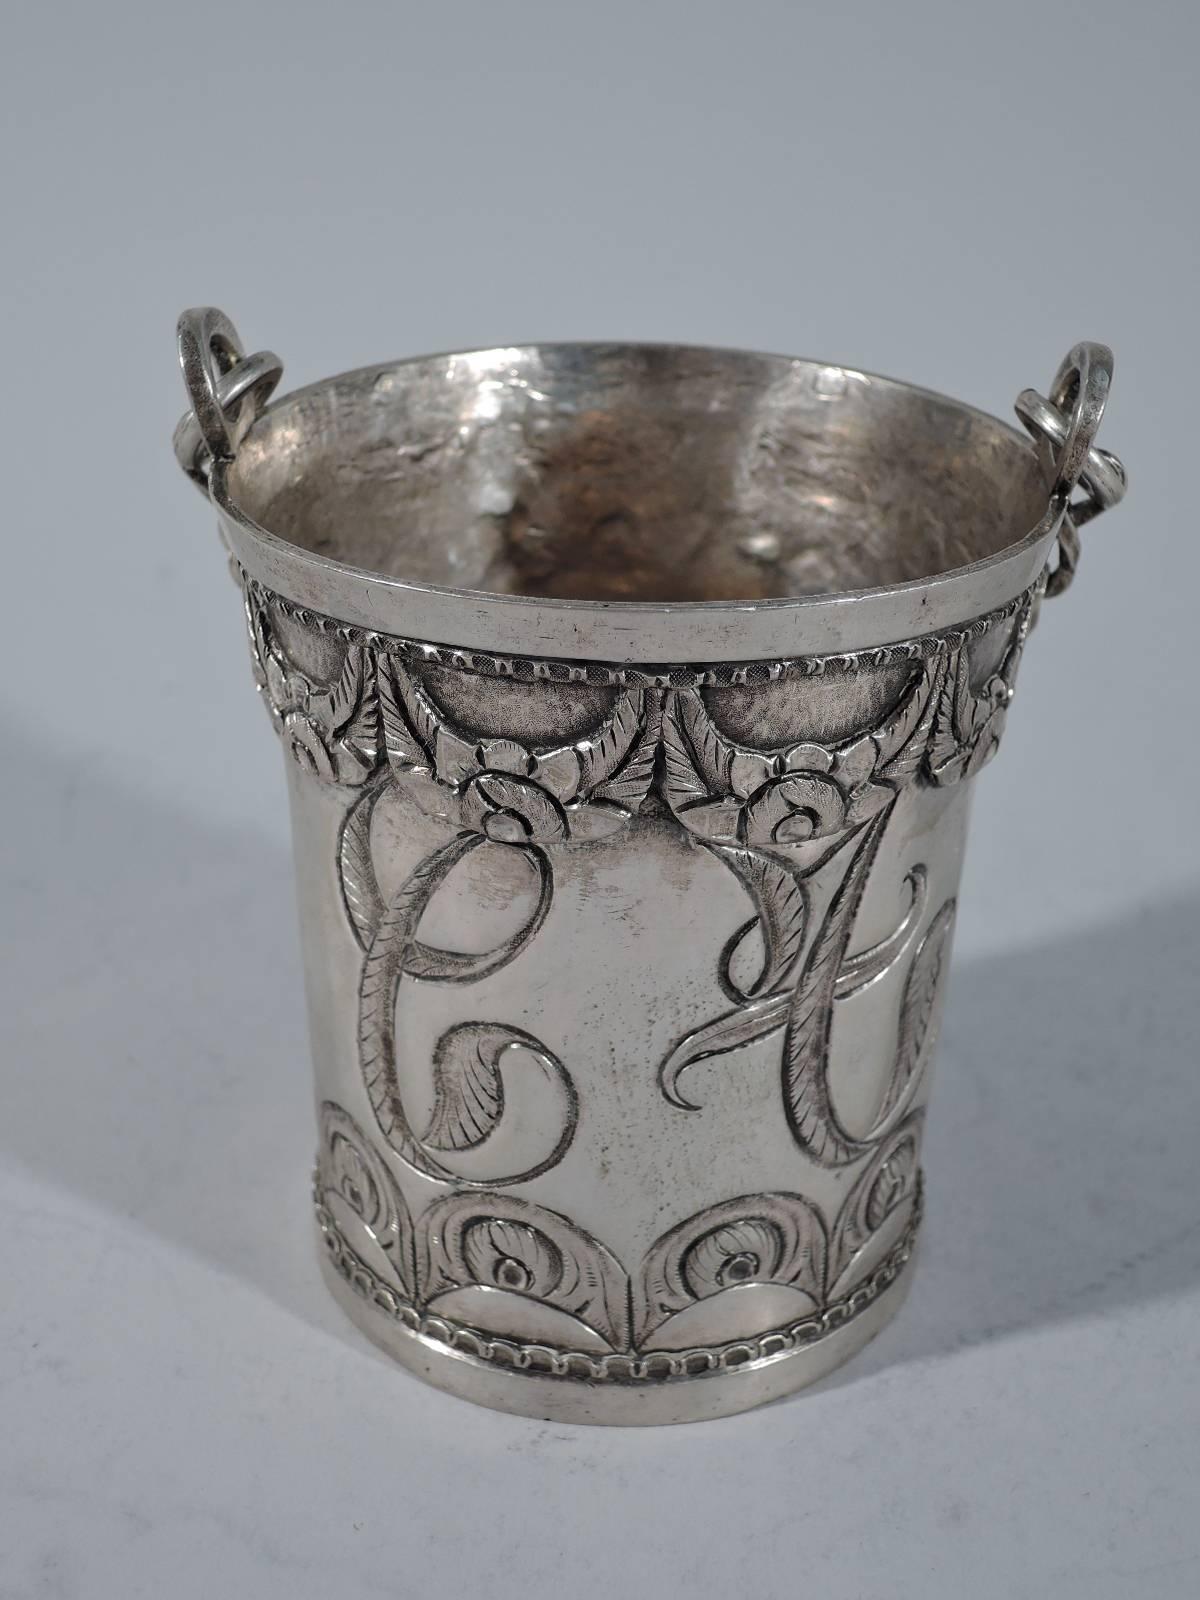 Nice quality Antique South American silver incense burner. Pail with applied garland at rim and chased and engraved peacock eye feather at base. Large three-letter monogram integrated into design. Chain handle attached to rim-mounted pierced rings.